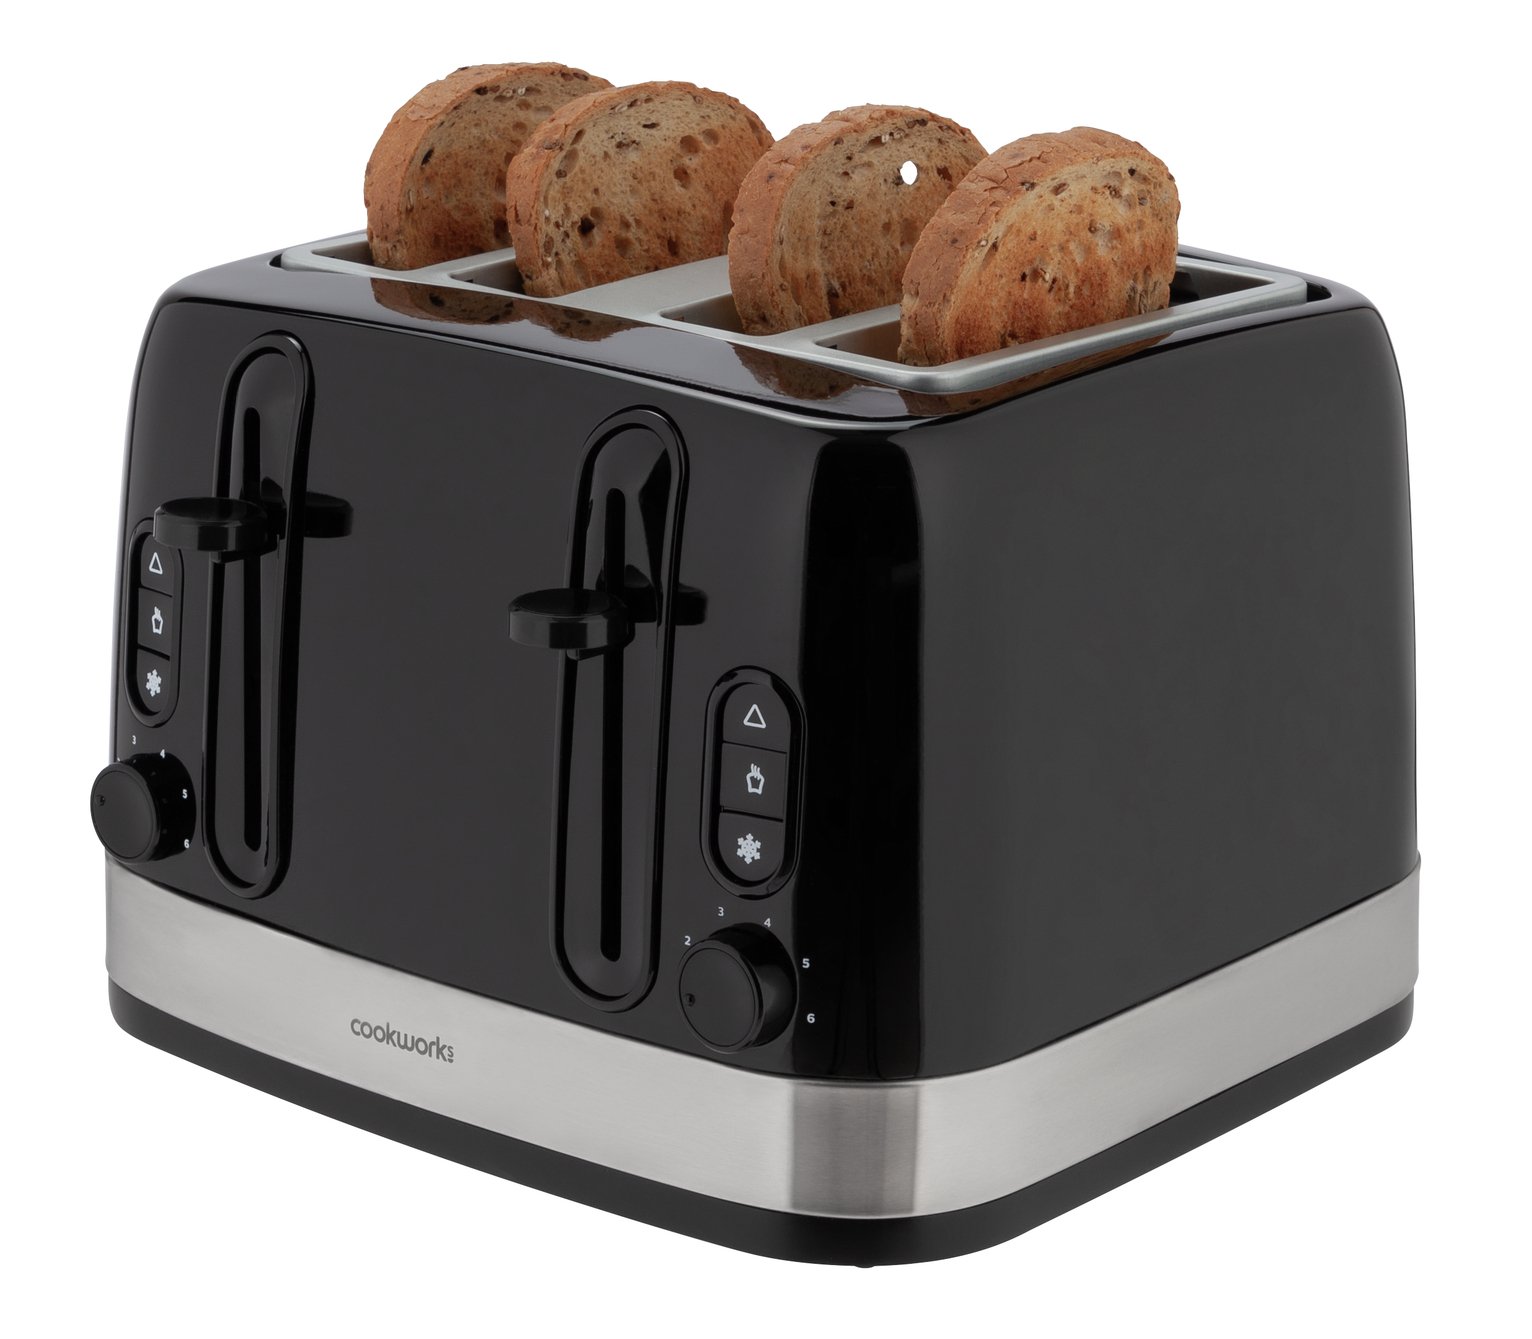 Cookworks Illuminated 4 Slice Toaster Review